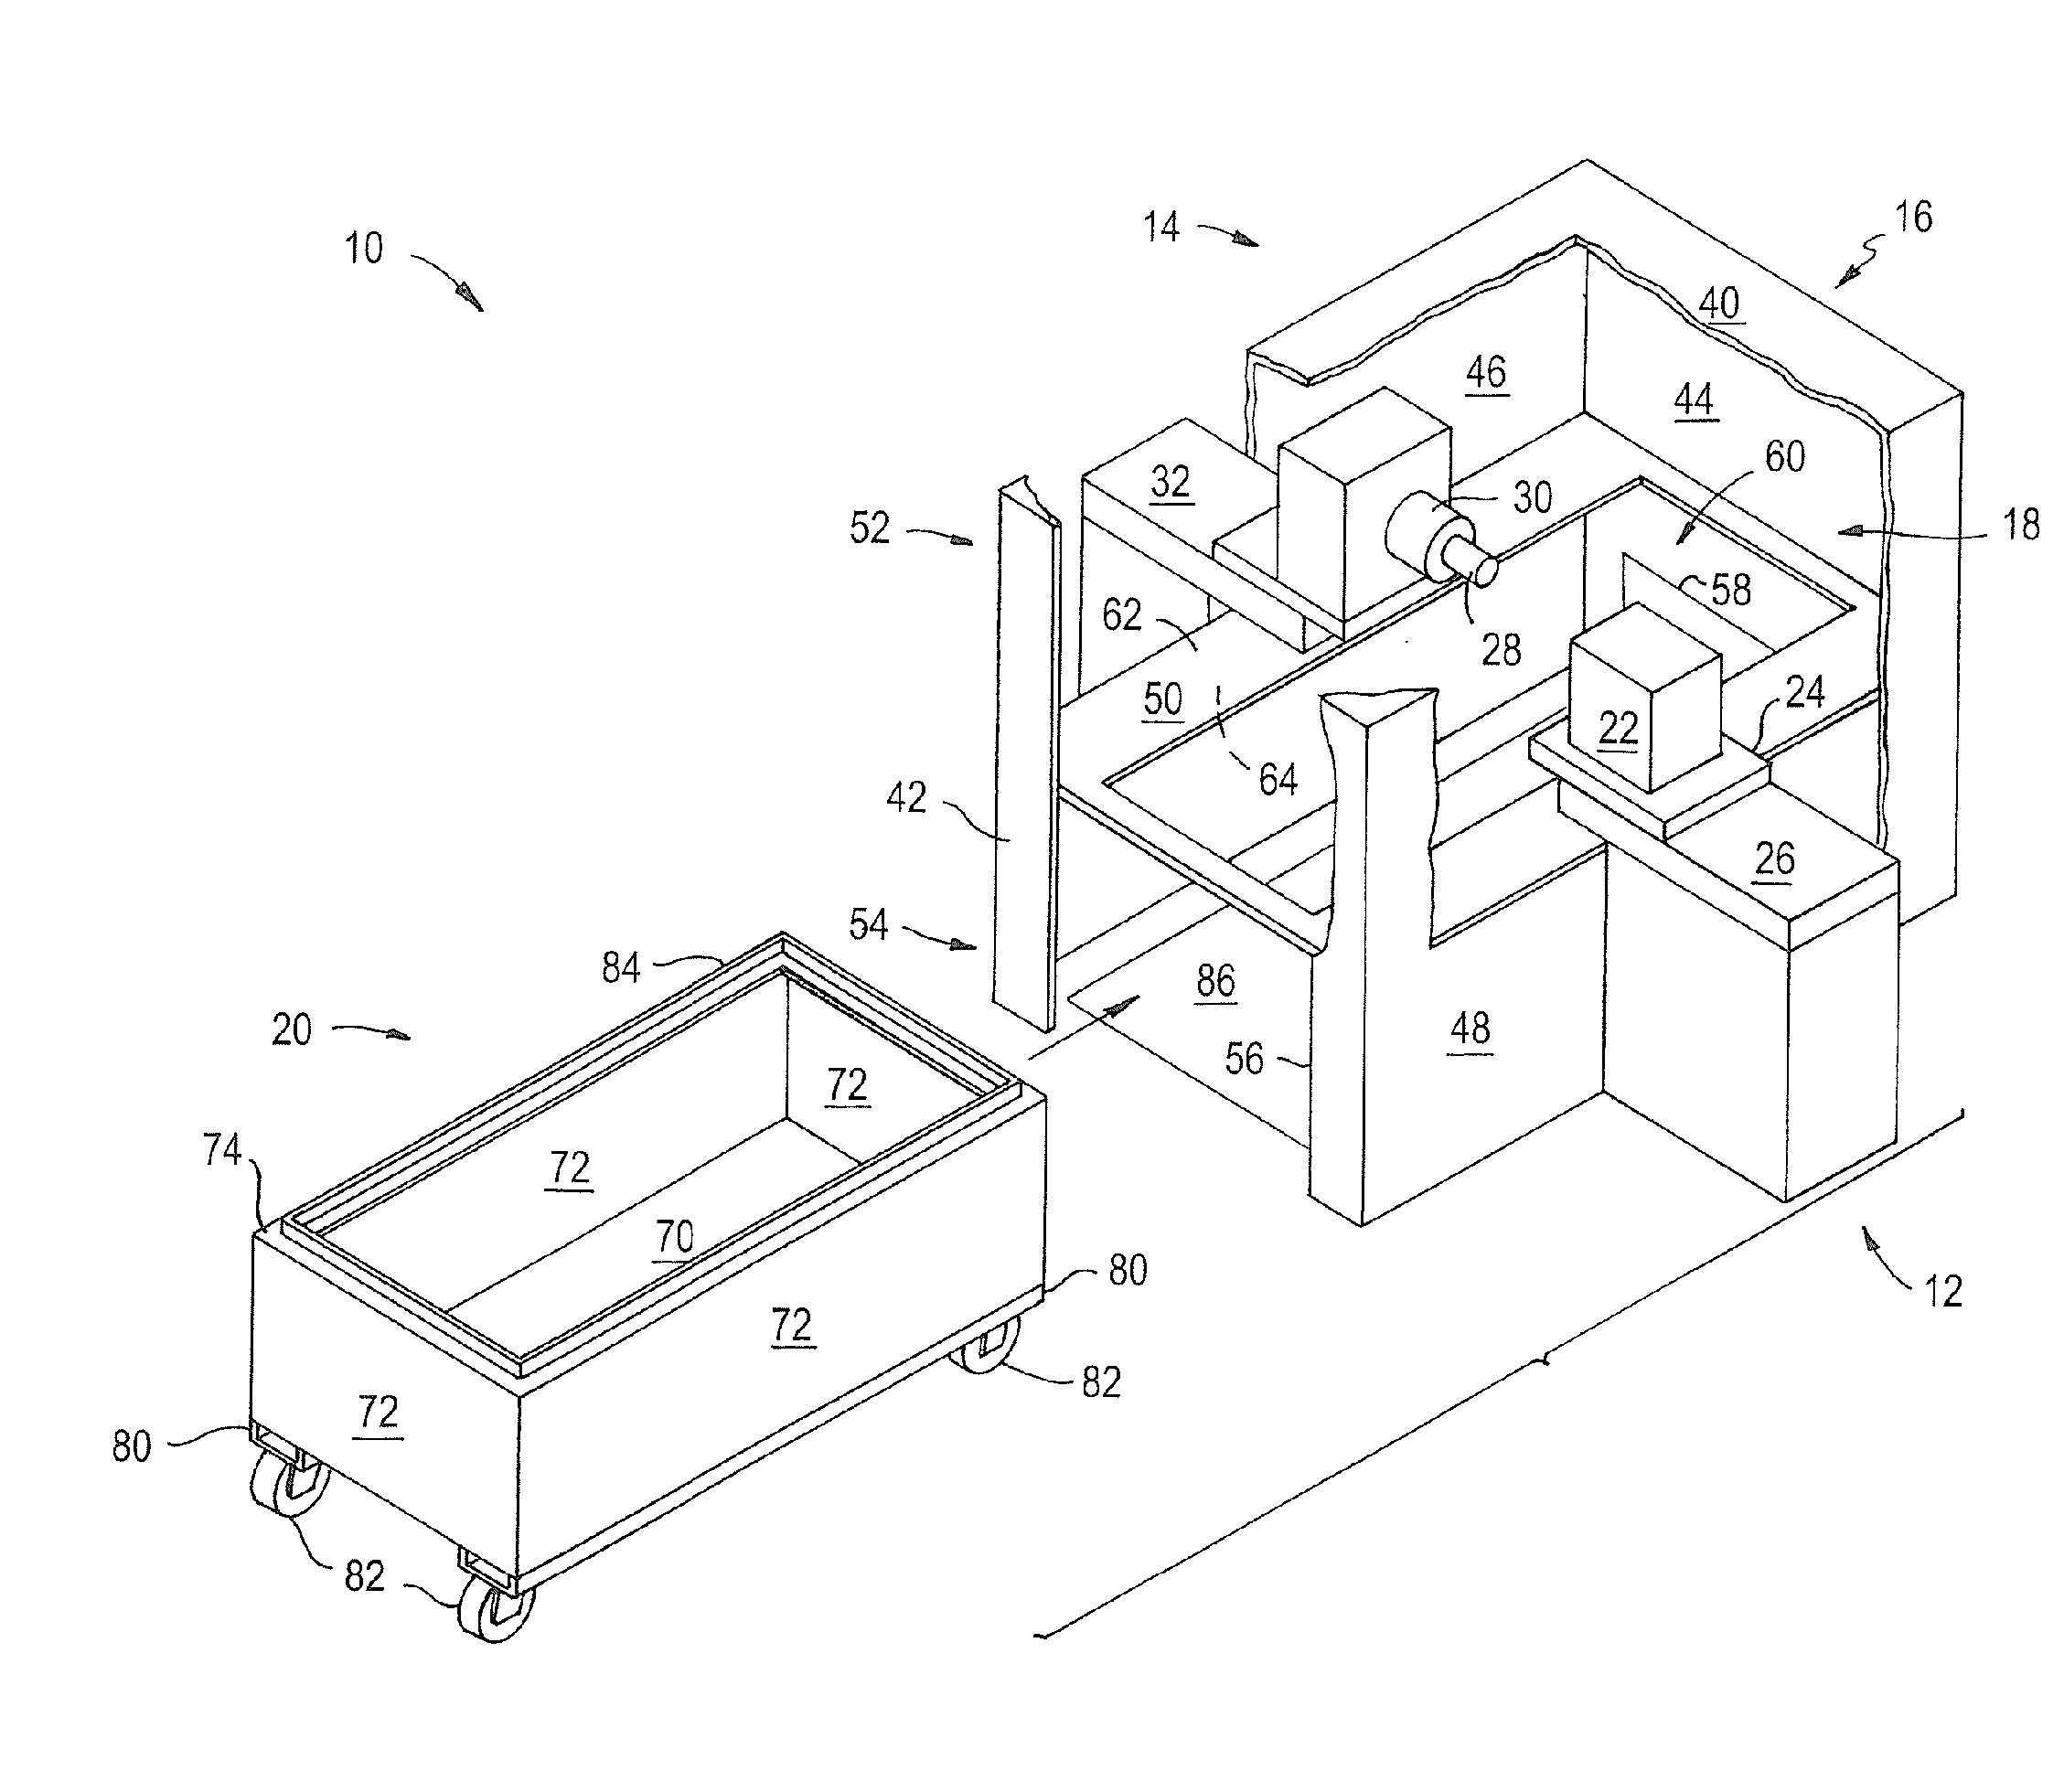 Machining system with integrated chip hopper